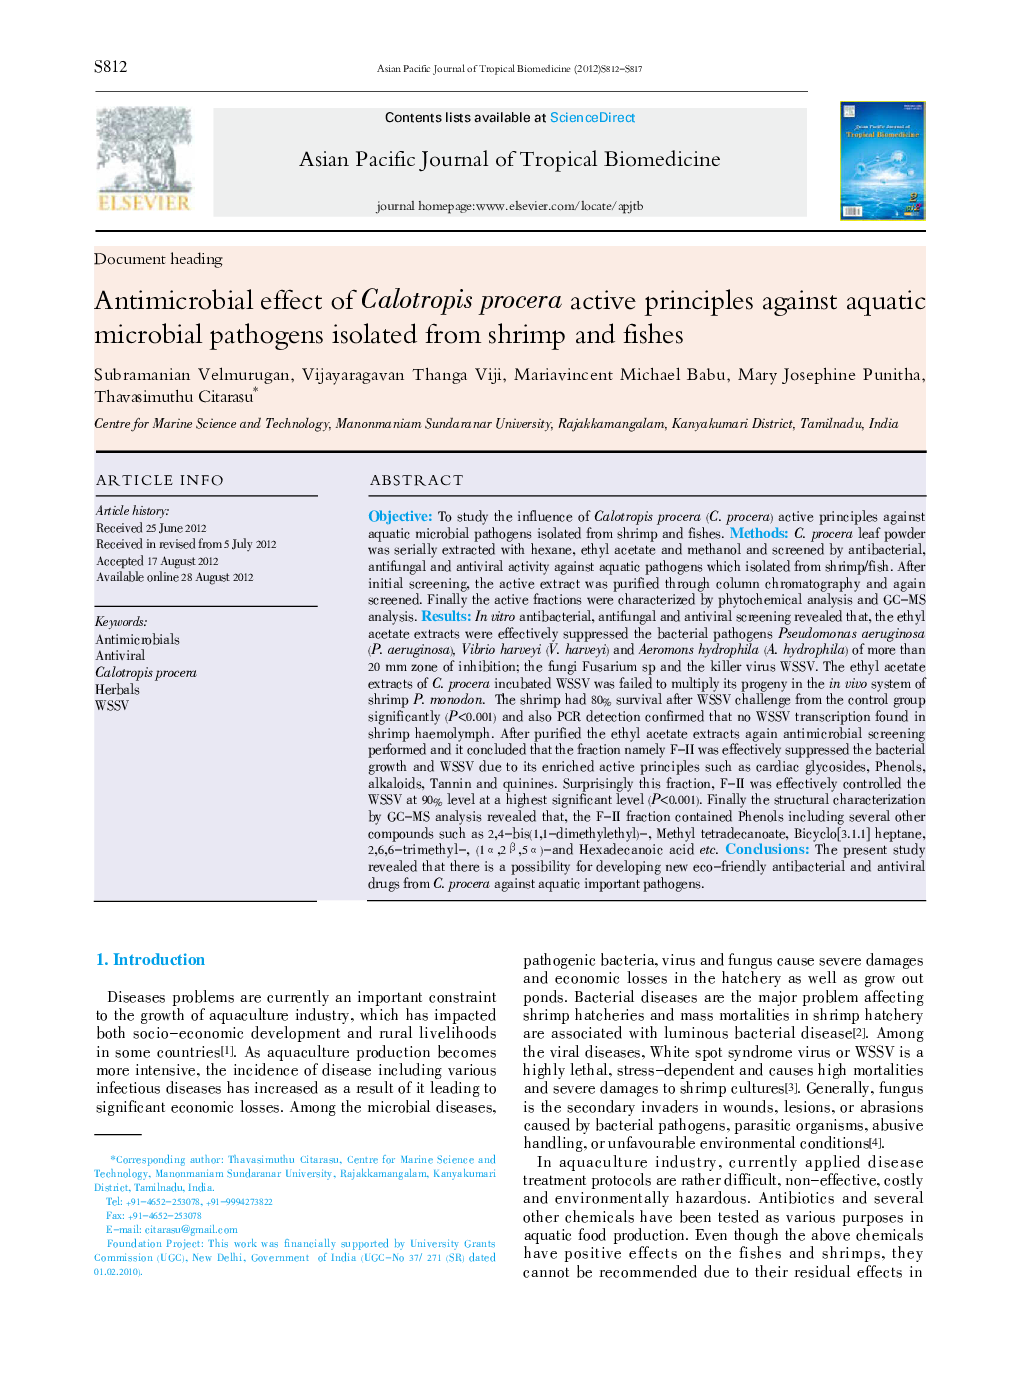 Antimicrobial effect of Calotropis procera active principles against aquatic microbial pathogens isolated from shrimp and fishes